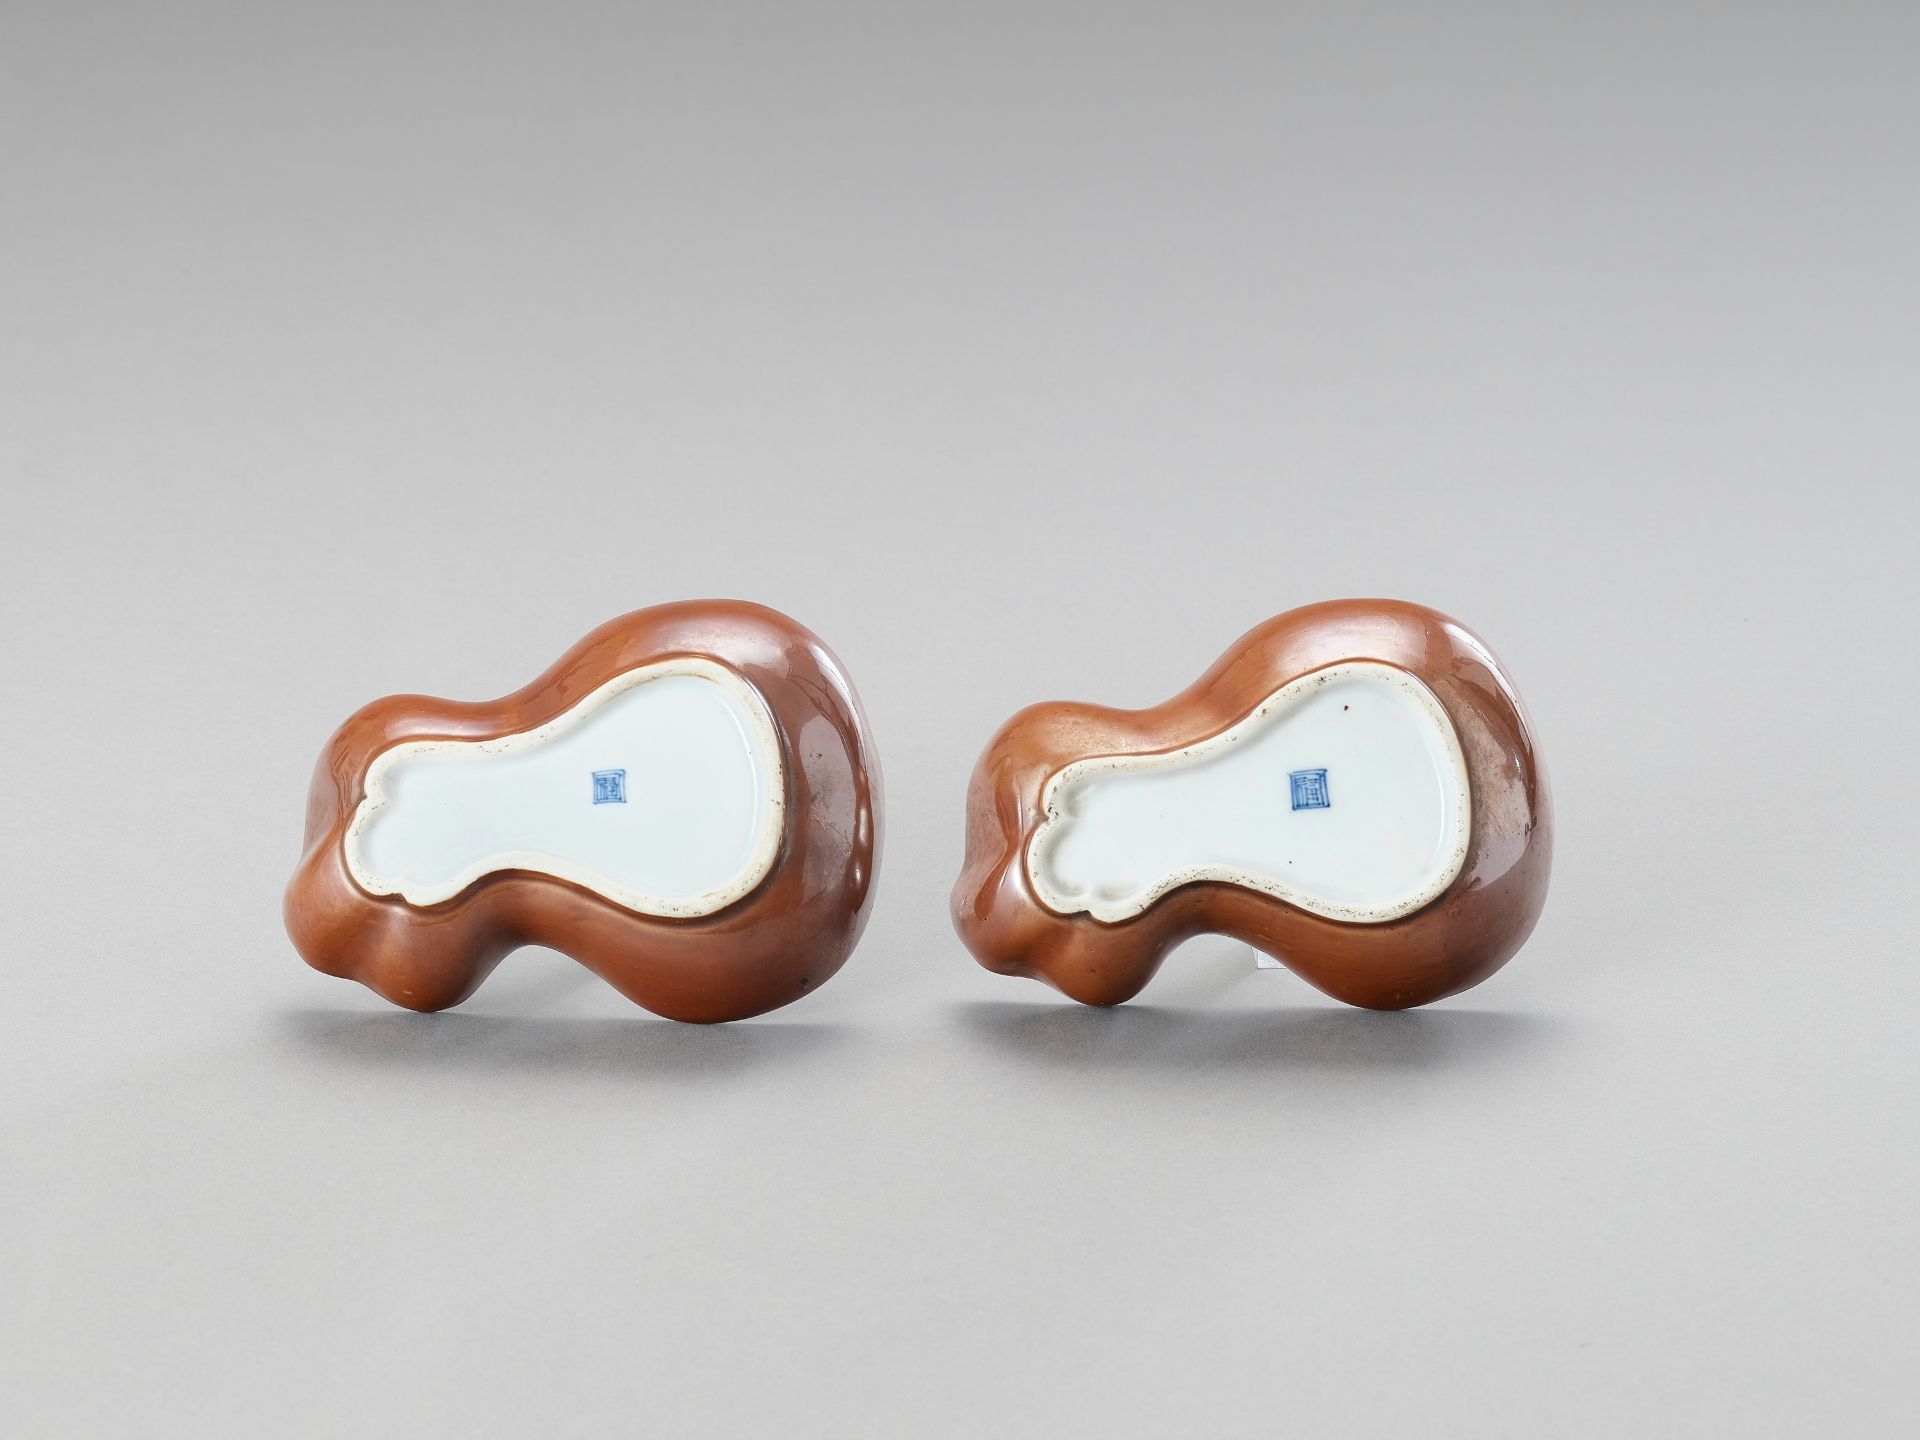 A PAIR OF GOURD-SHAPED PORCELAIN SAUCERS - Image 4 of 4